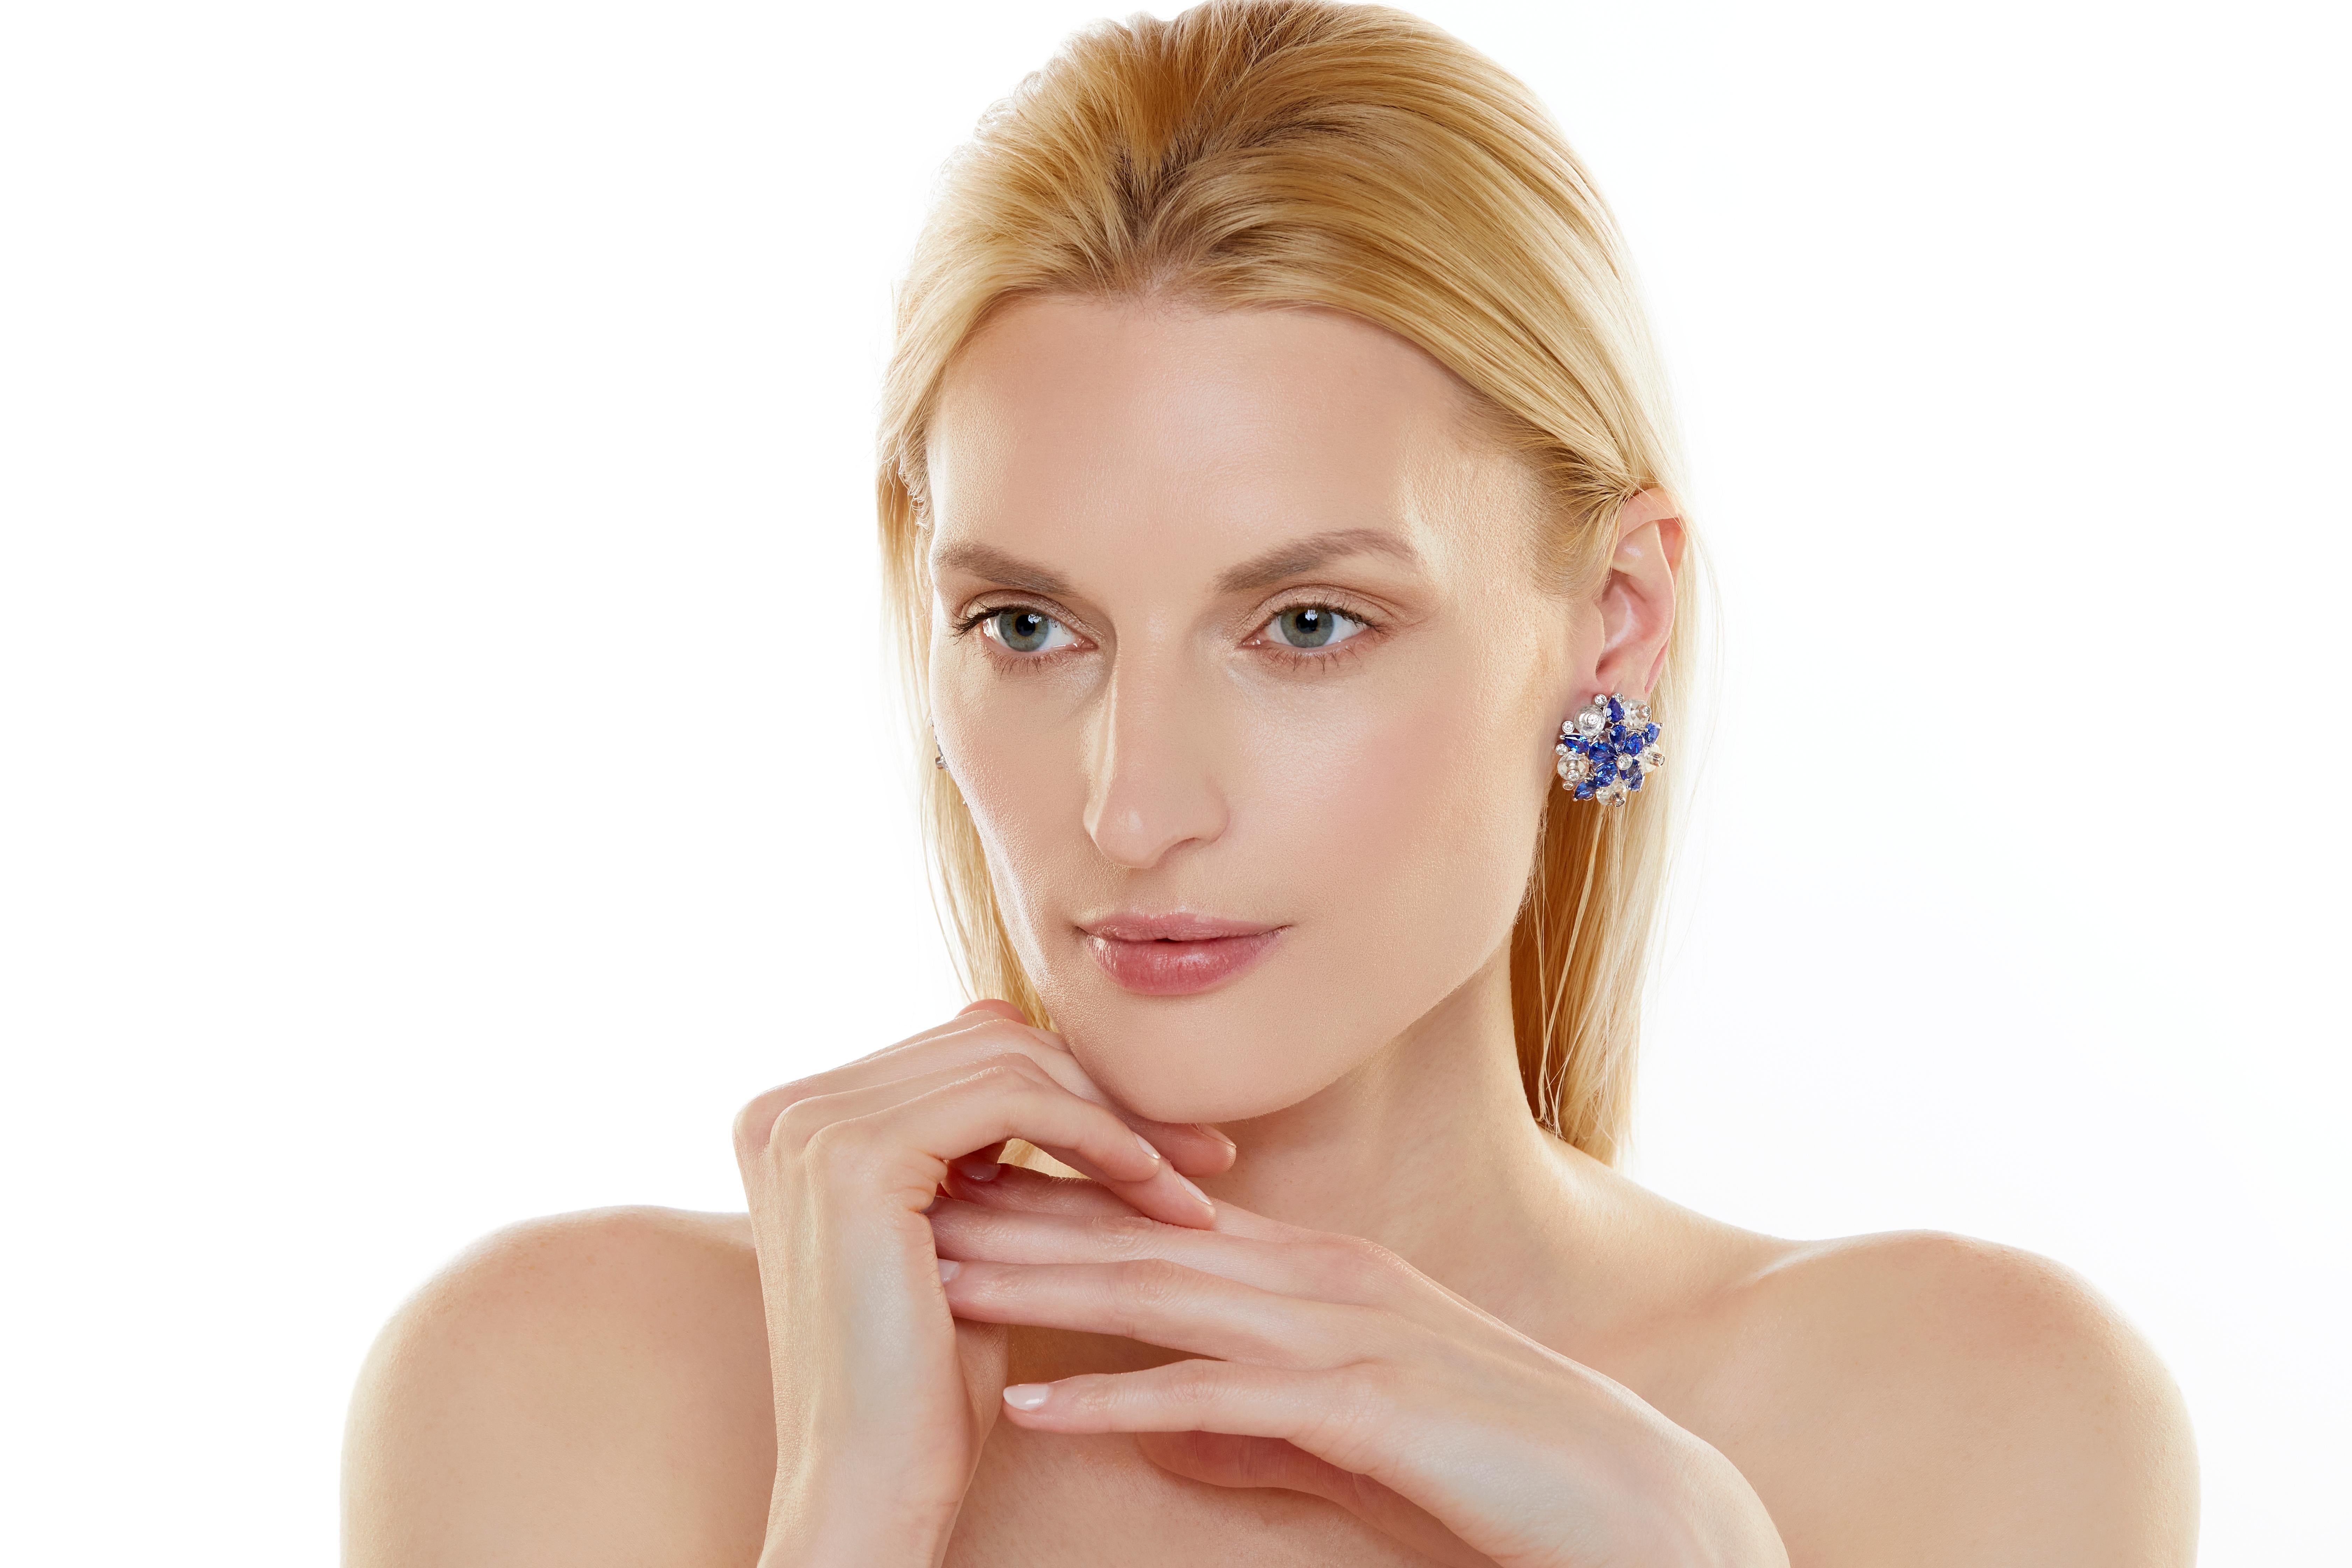 The Aletto family has been making exquisite hand-crafted jewelry for five generations. The firm was founded in Naples, Italy in the late 19th century and is currently based in Boca Raton. Designed as stylized flowers, these ear clips feature bright